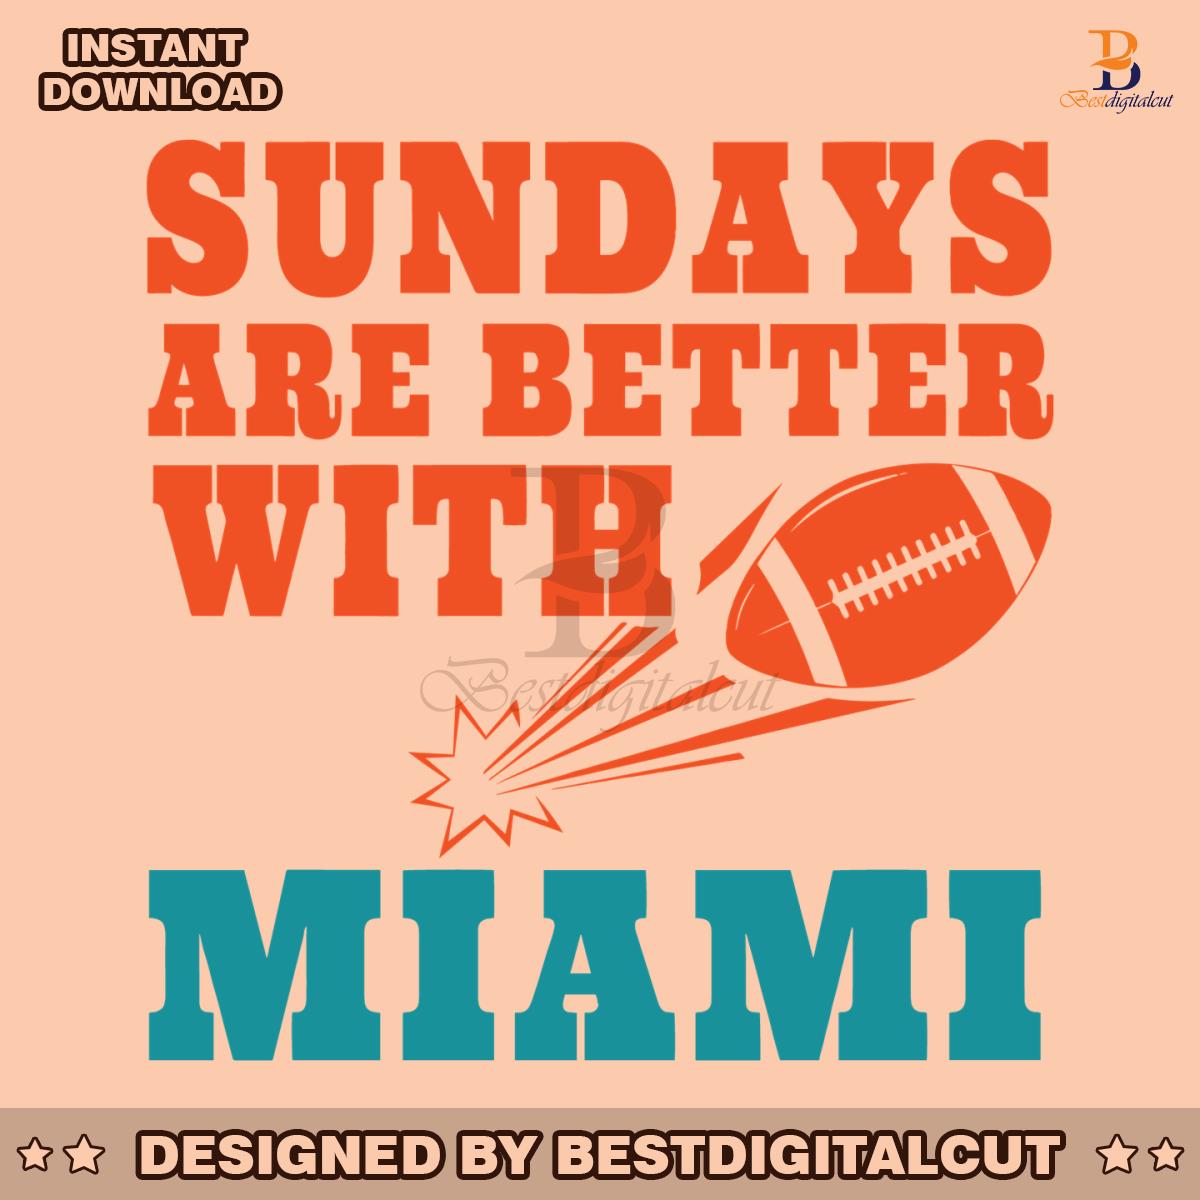 sundays-are-better-with-miami-svg